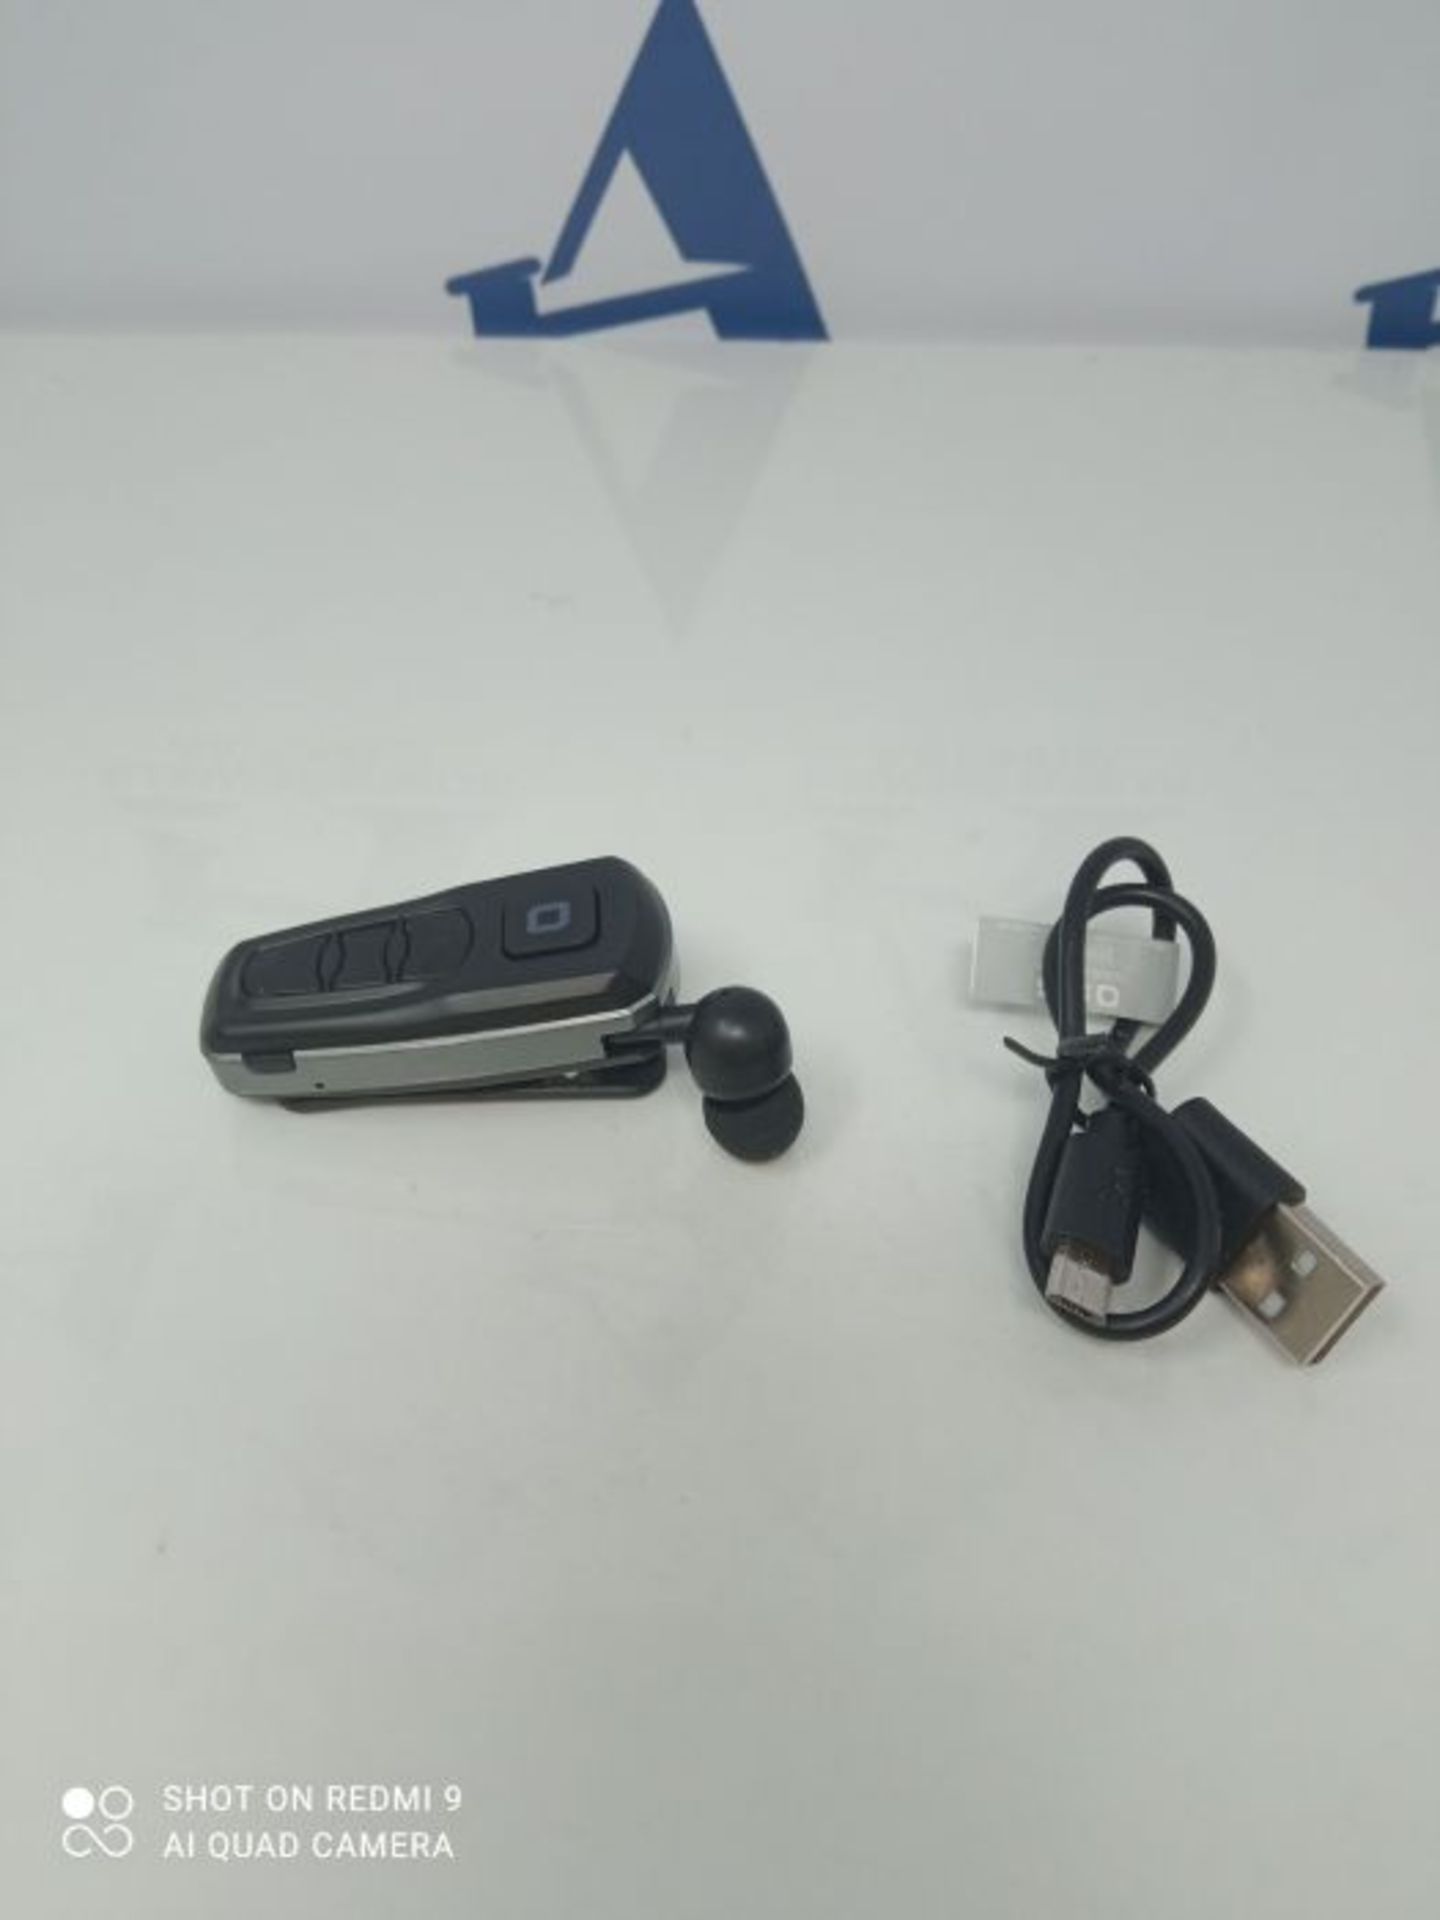 SBS Bluetooth Headset with Clip and Roll-up Wire Multipoint Technology to connect 2 de - Image 2 of 6